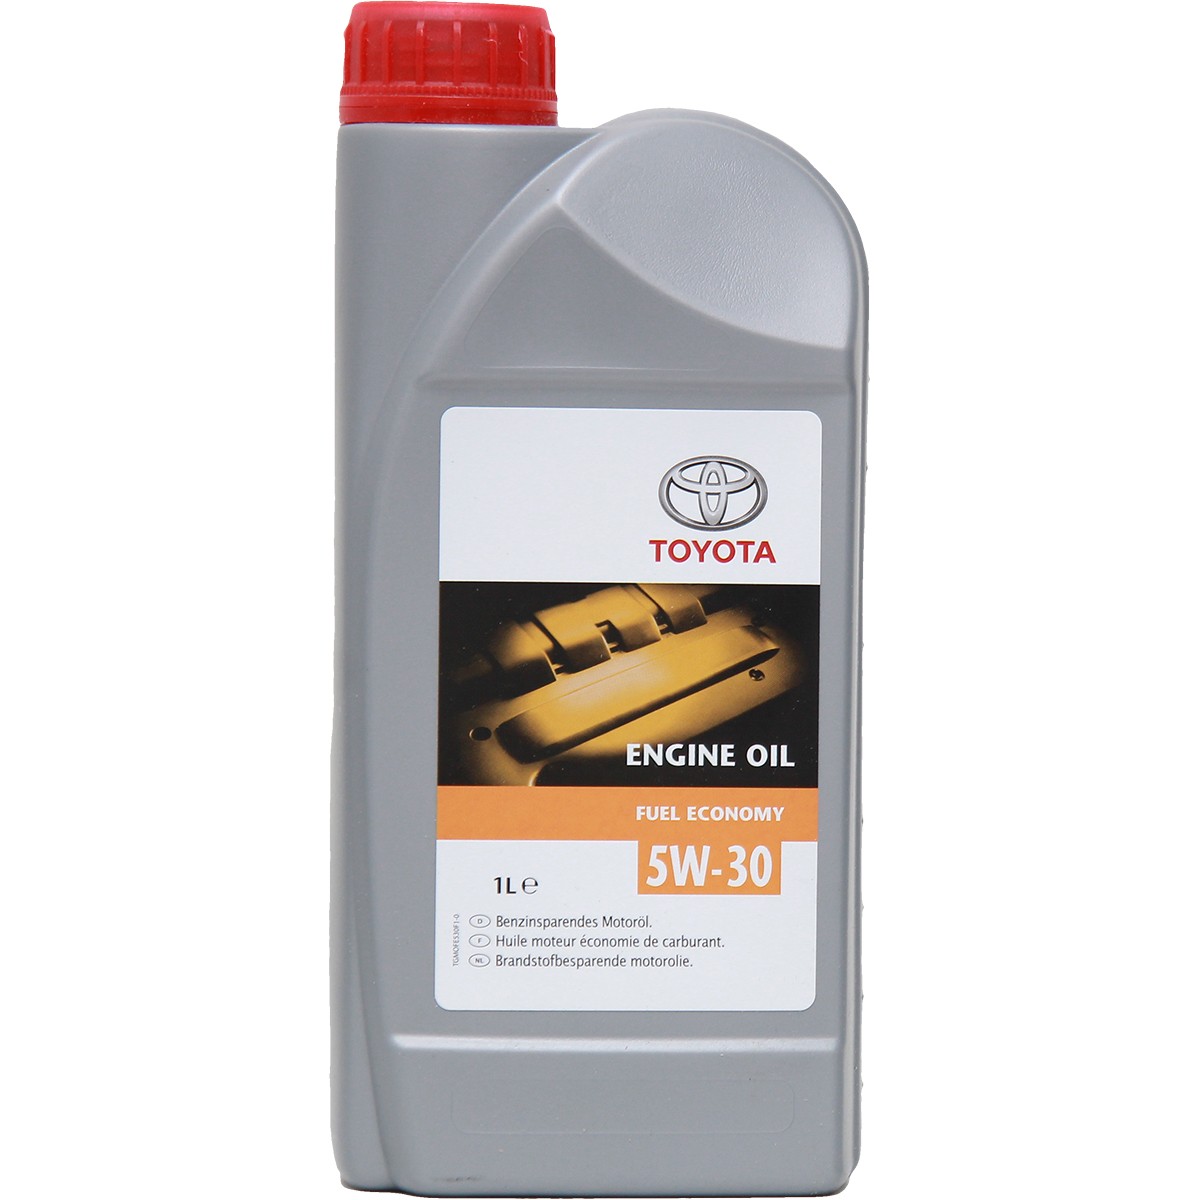 Ford Fiesta Mk6 Saloon Oils and fluids parts - Engine oil TOYOTA 08880-83388